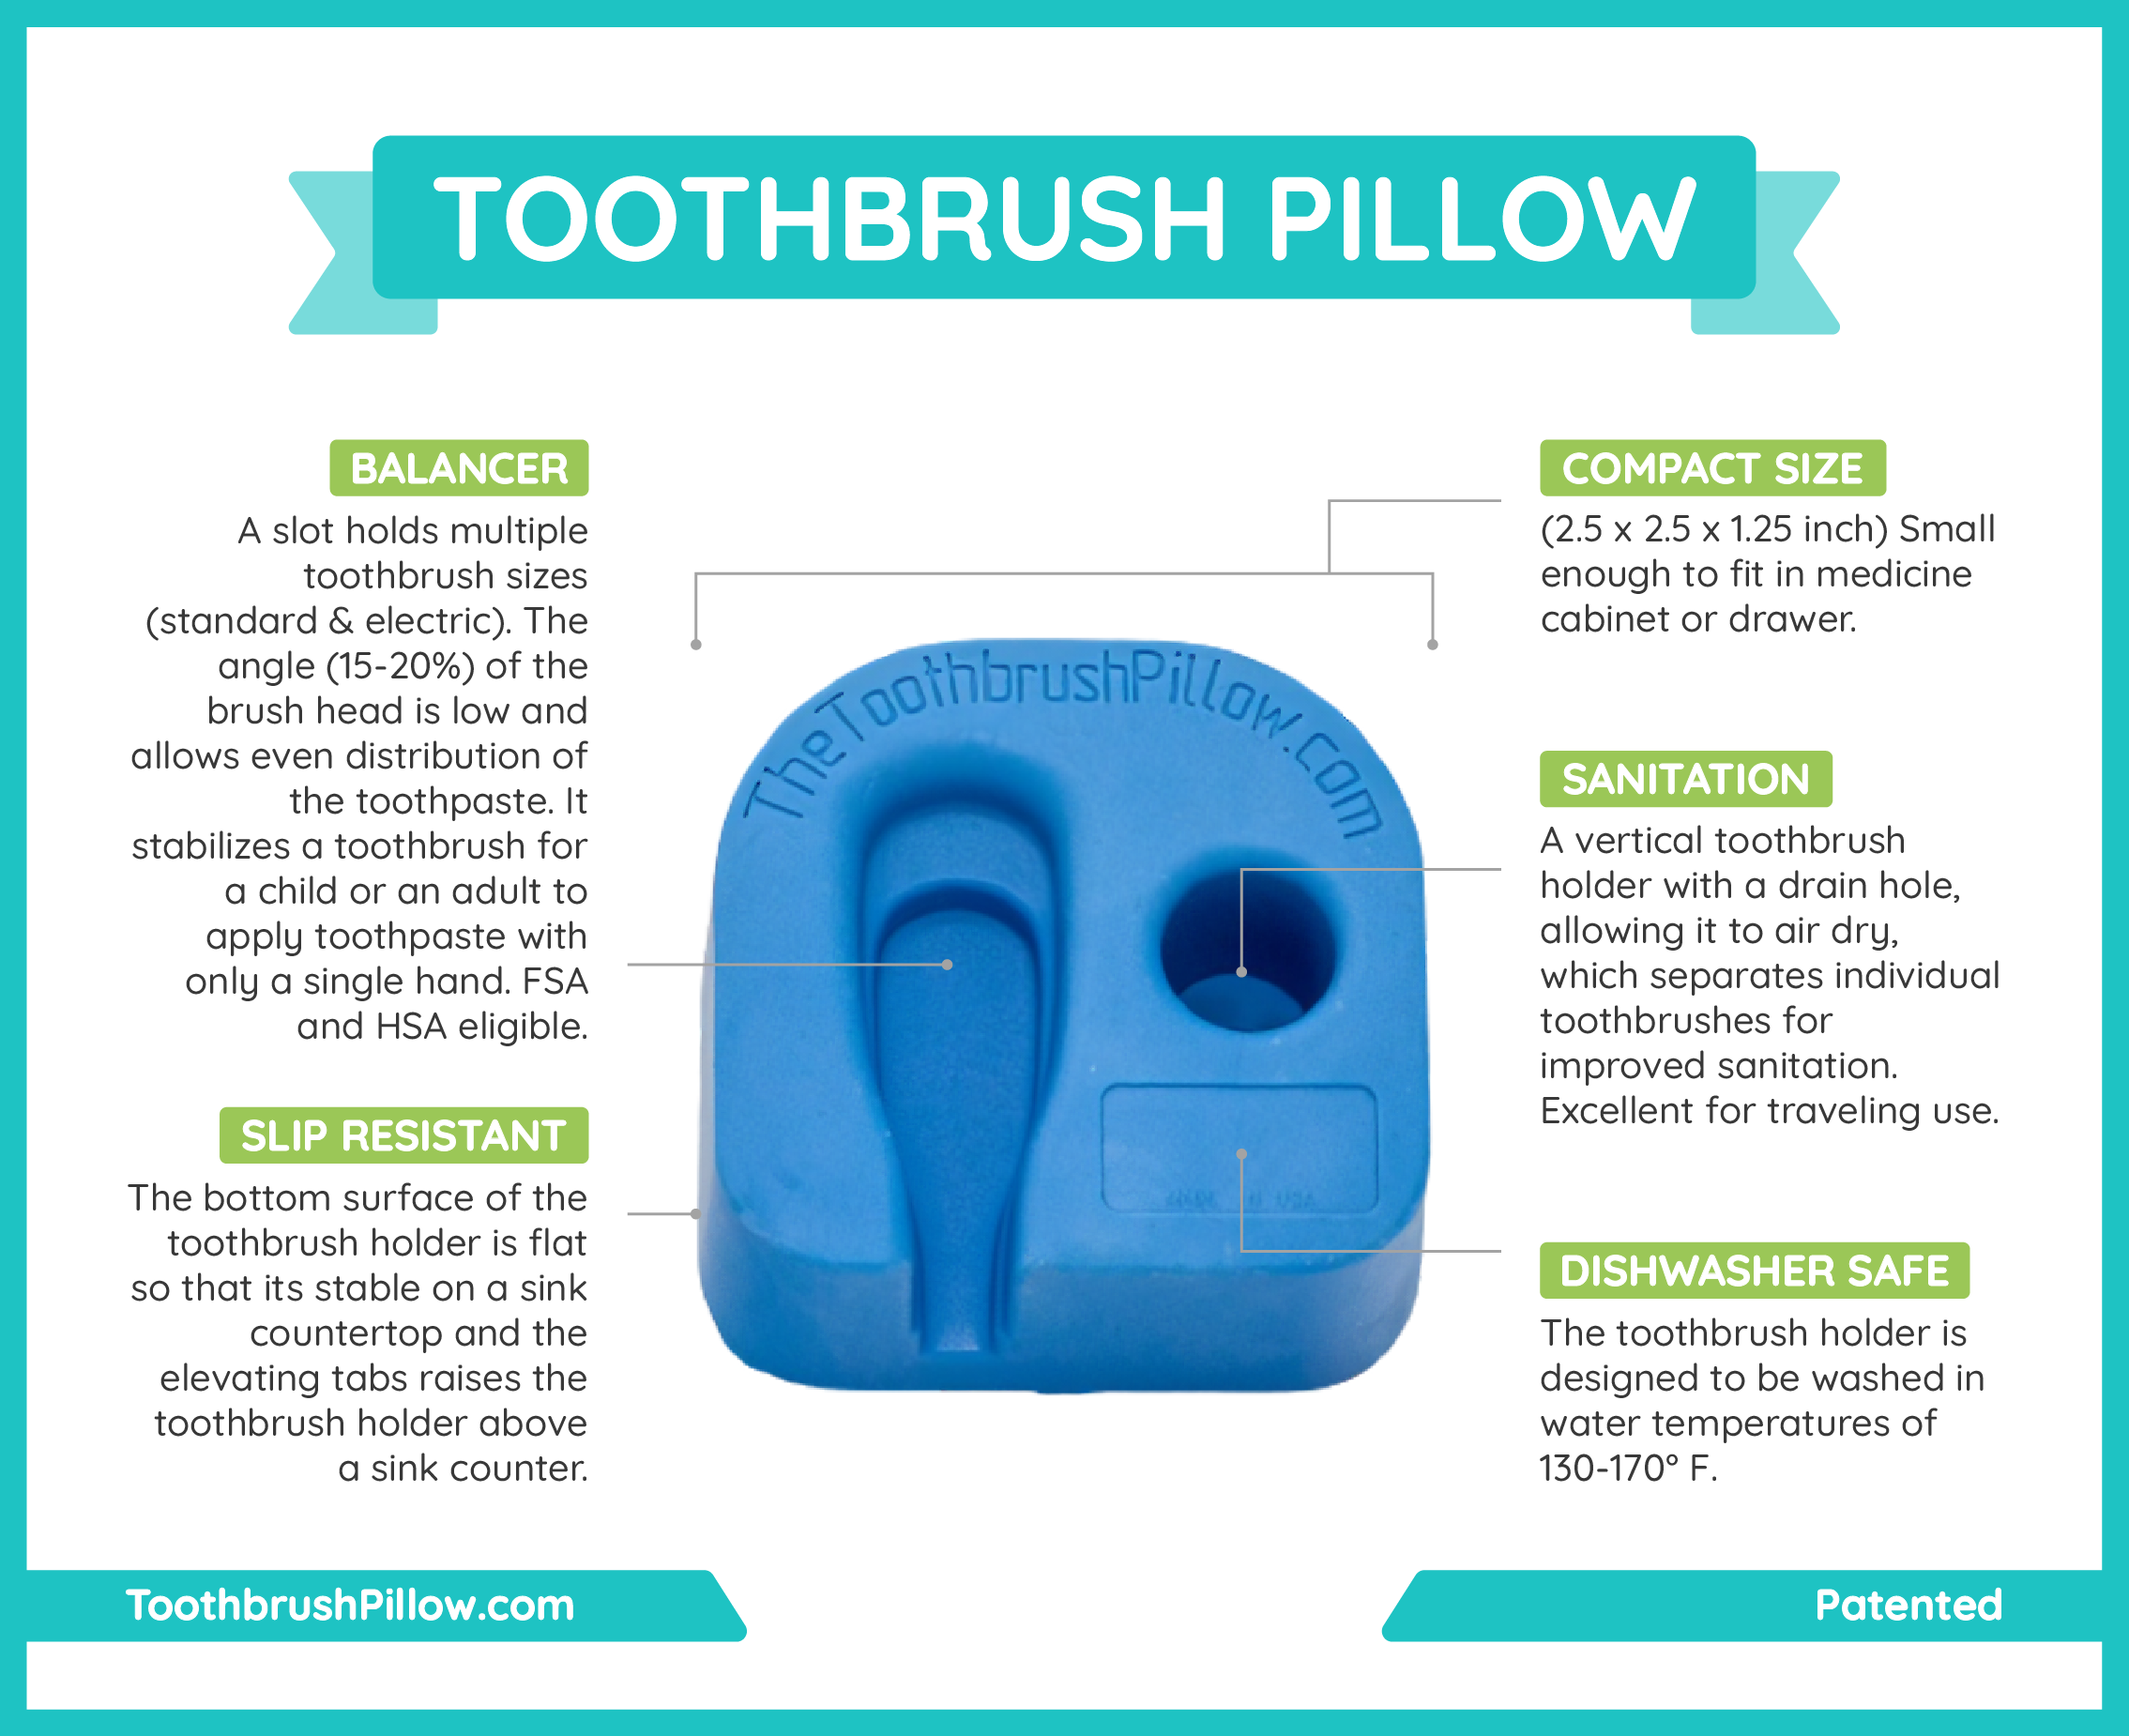 Infographic of Toothbrush Pillow features; balancer, slip resistant, compact size, sanitation, dishwasher safe